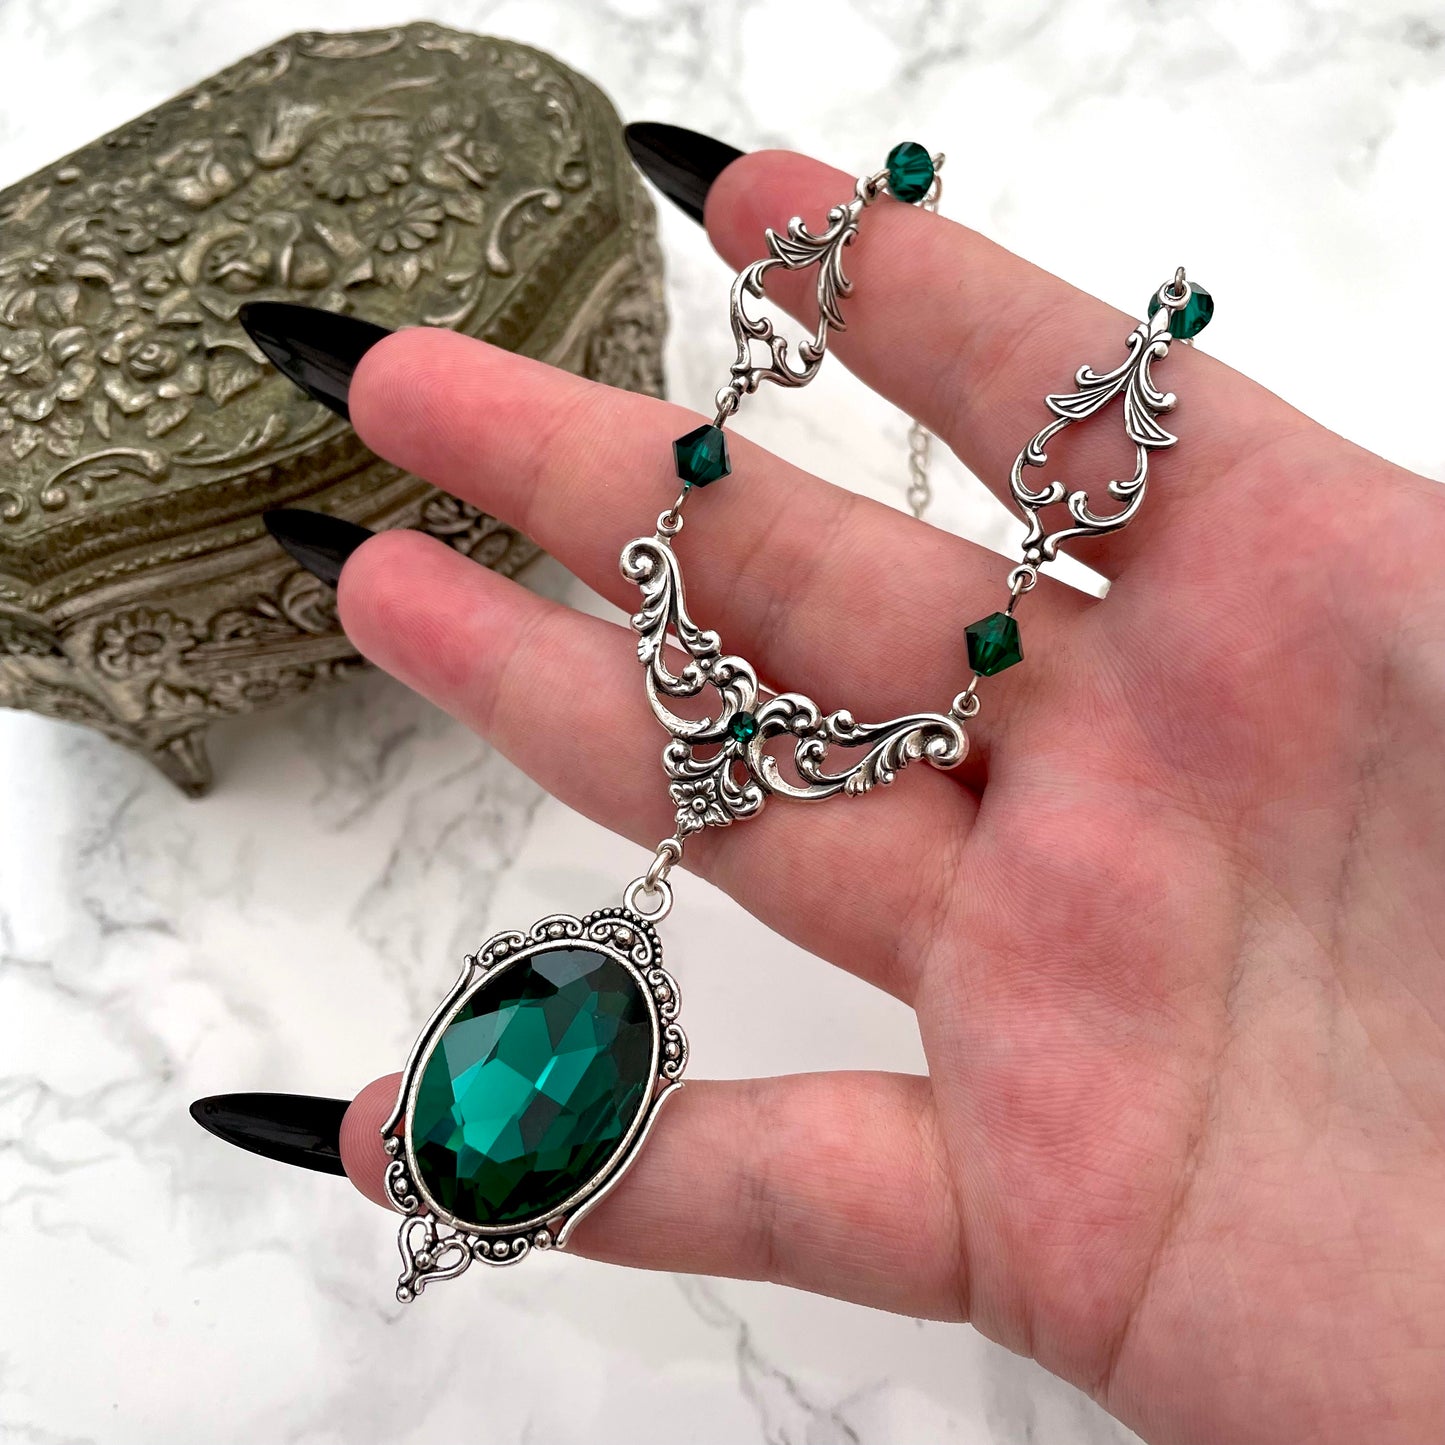 Emerald necklace, gothic emerald necklace, green and silver necklace, Slytherin necklace, Slytherin jewellery, Slytherin jewelry, victorian gothic necklace, victorian goth, victorian gothic necklace green, green gothic necklace, necklace with green jewels